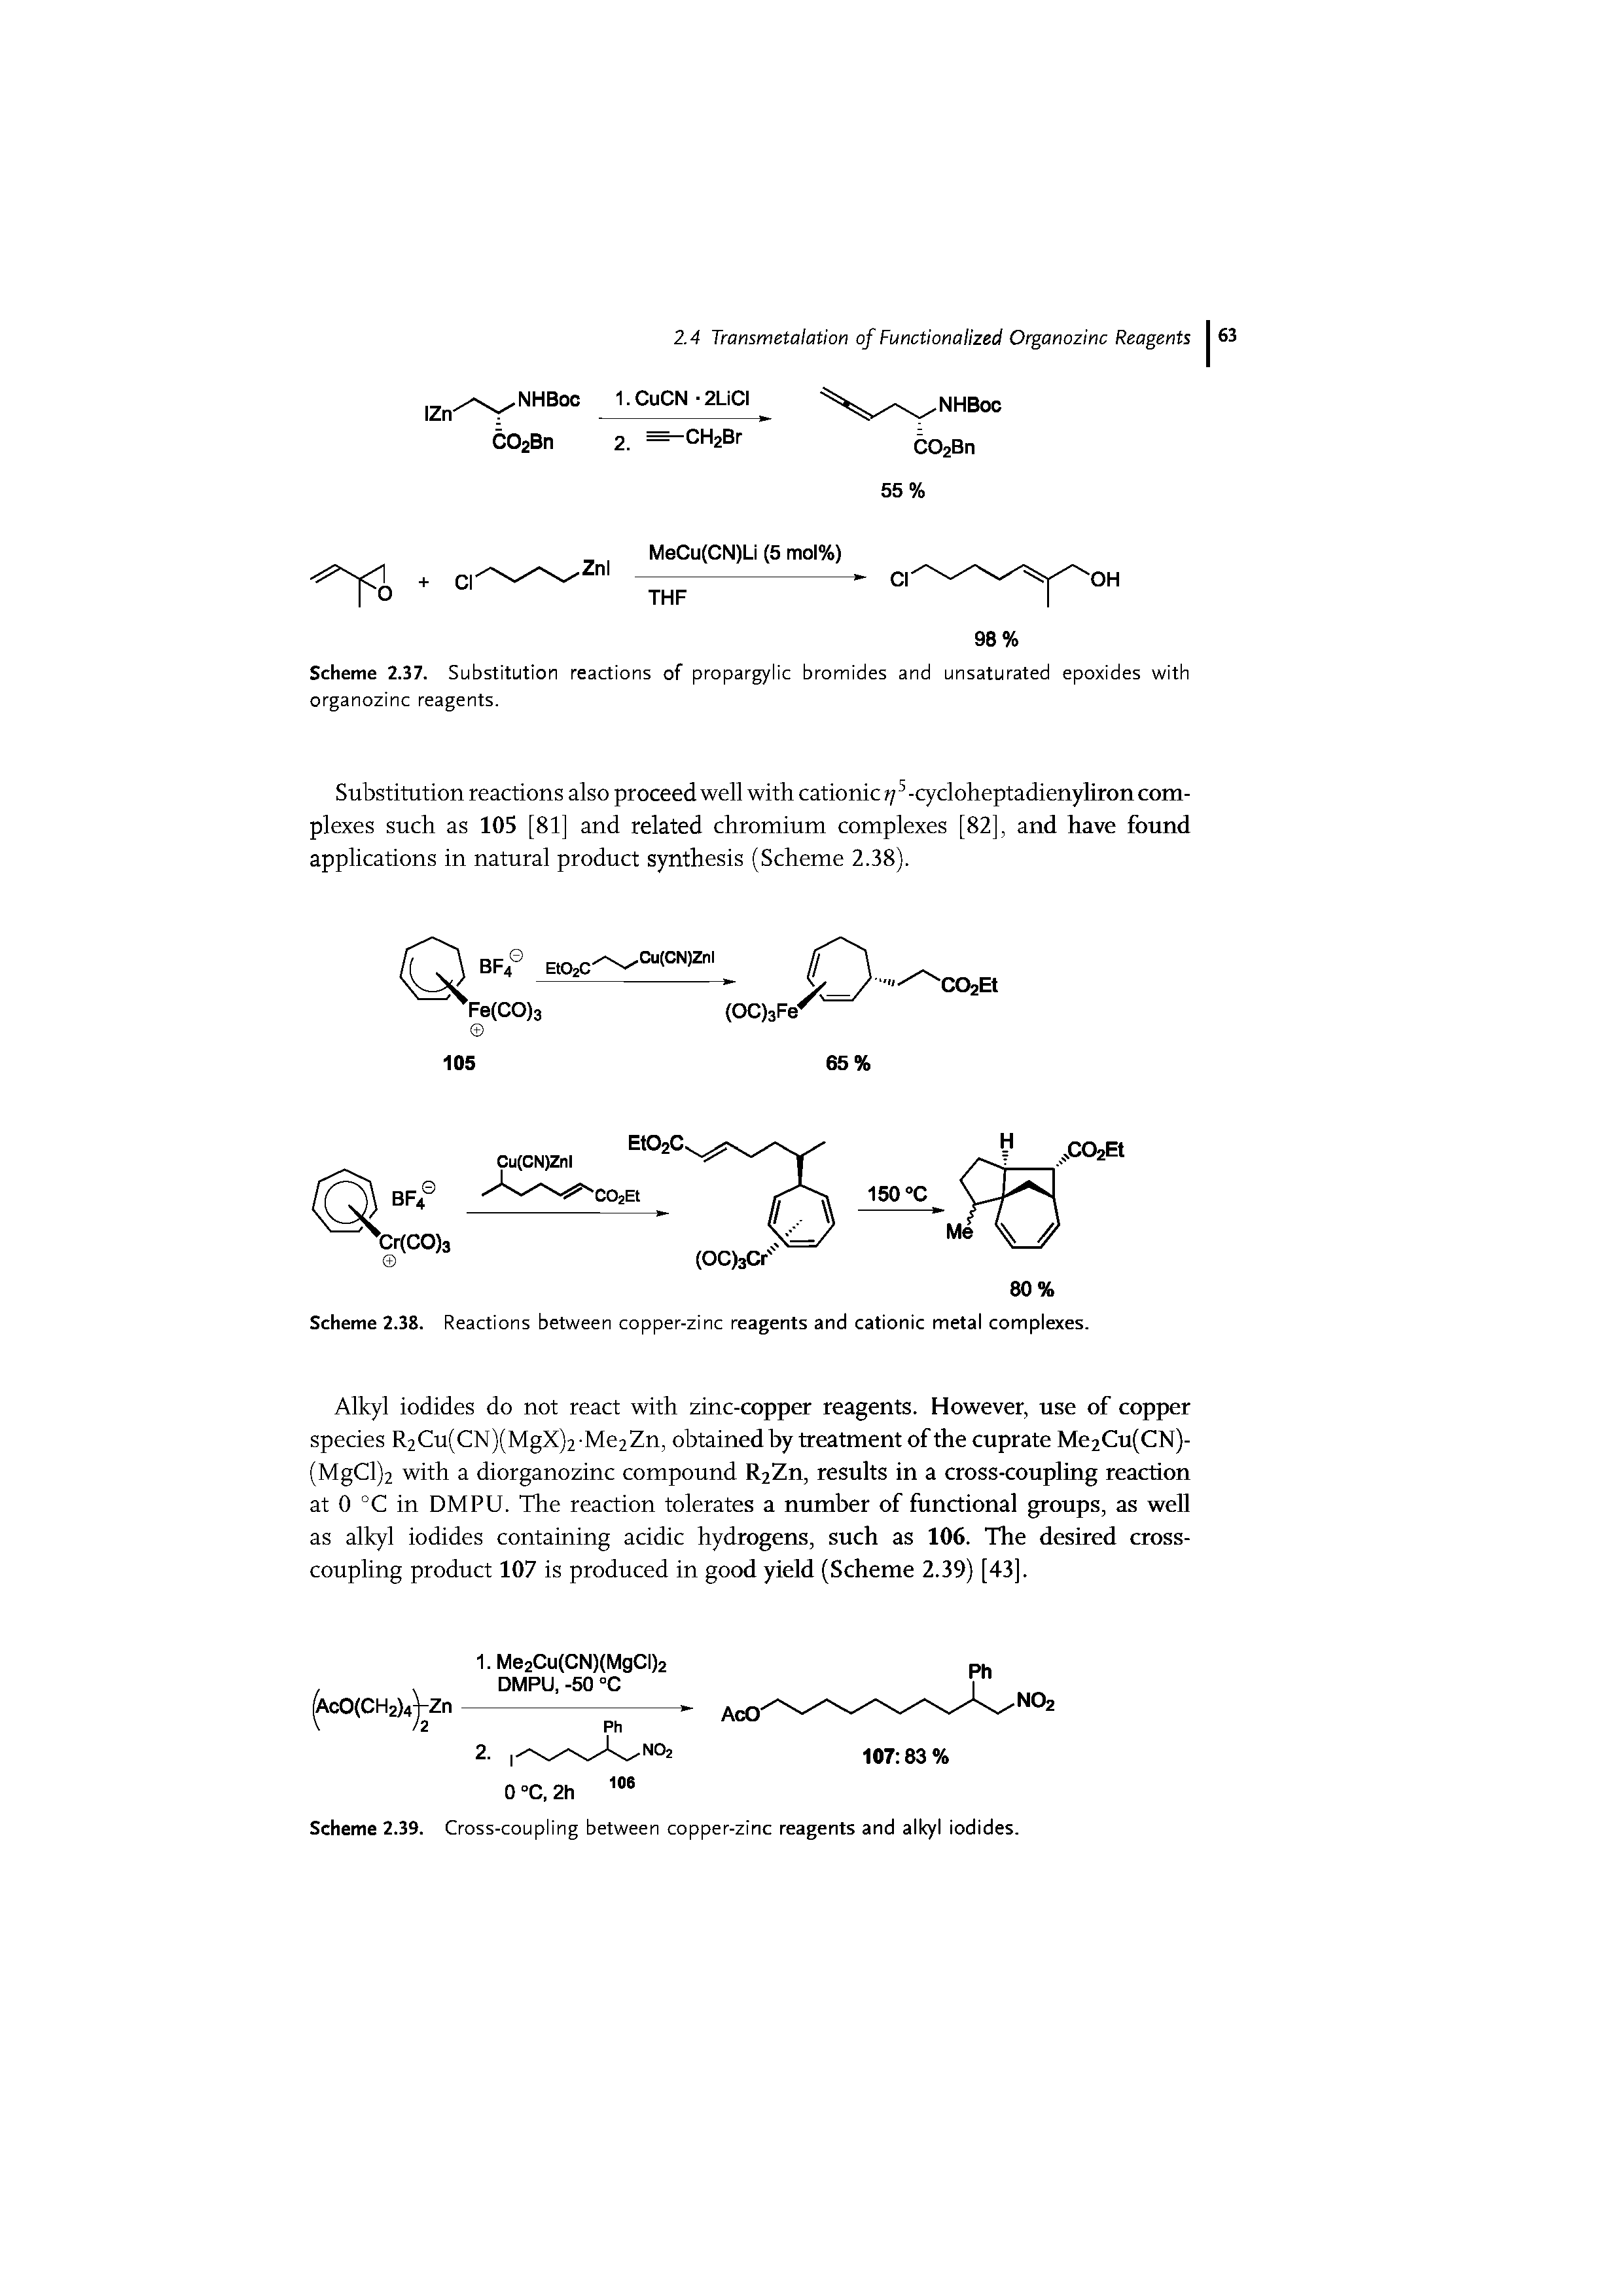 Scheme 2.37. Substitution reactions of propargylic bromides and unsaturated epoxides with organozinc reagents.